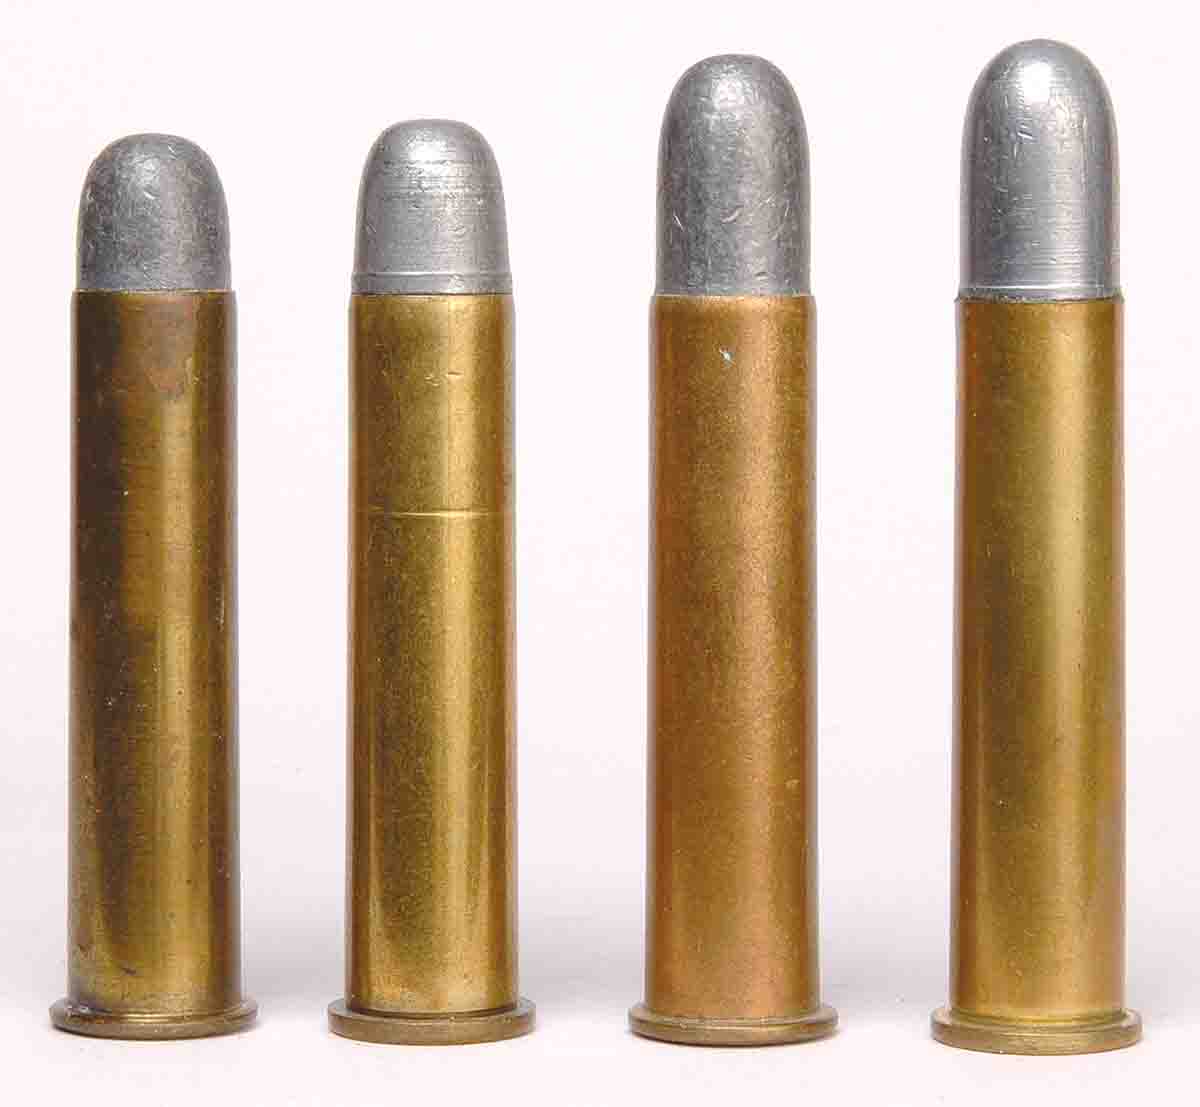 Left to right: post-1881 .45 Government with 405-grain bullet, a handload with Lyman bullet 457124 (395 grains), a .45 Government with a 500-grain bullet and a handload with Lyman bullet 457125 (520 grains).